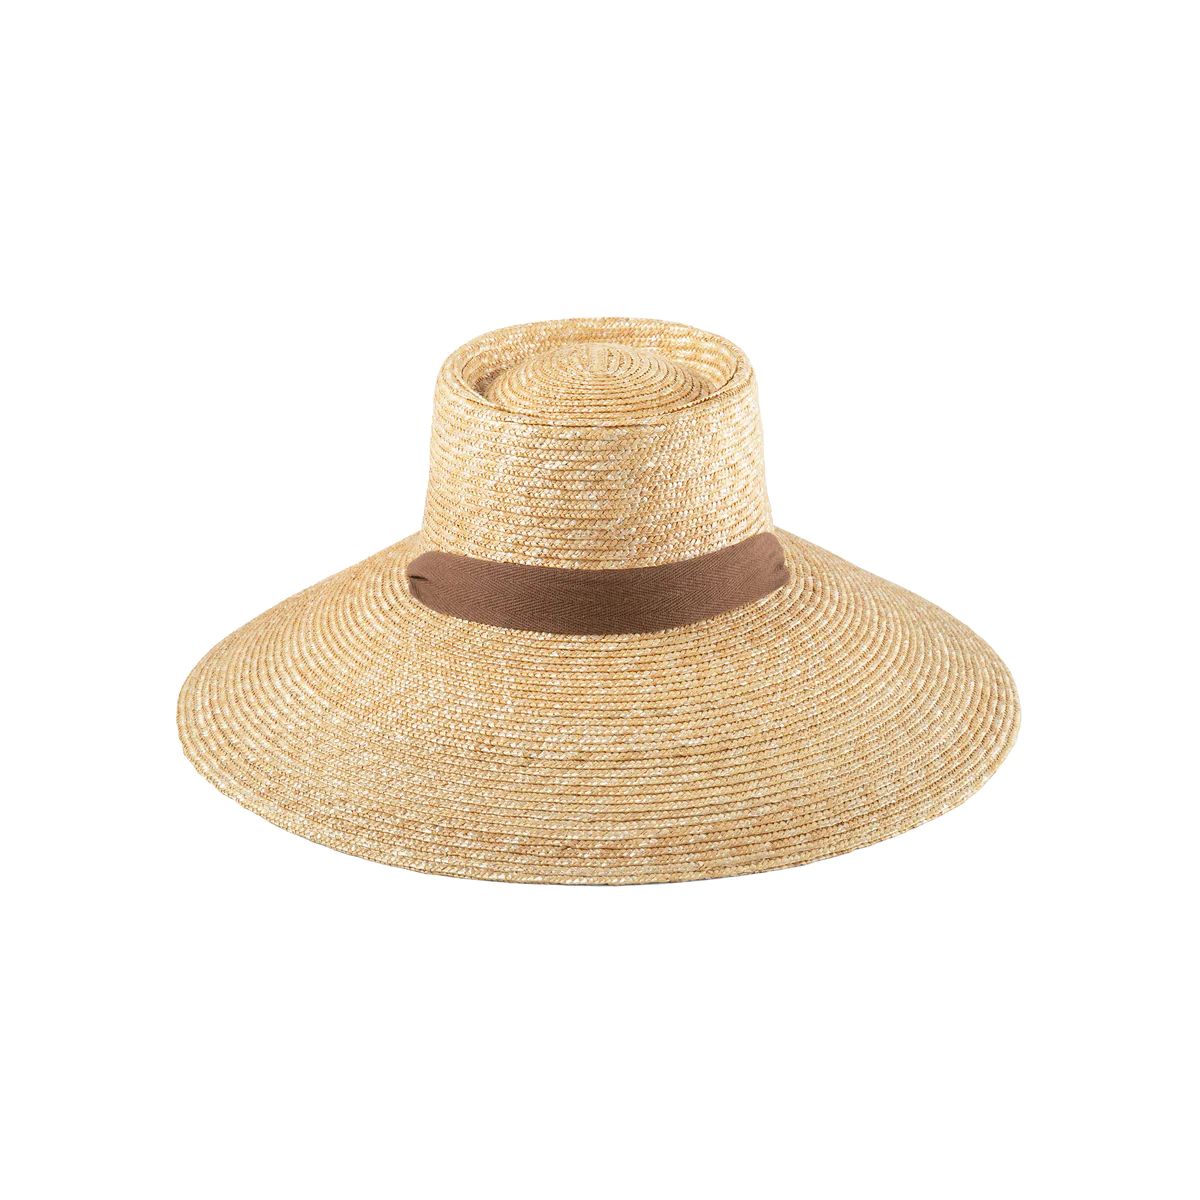 Paloma Sun Hat - Straw Boater Hat in Natural | Lack of Color US | Lack of Color